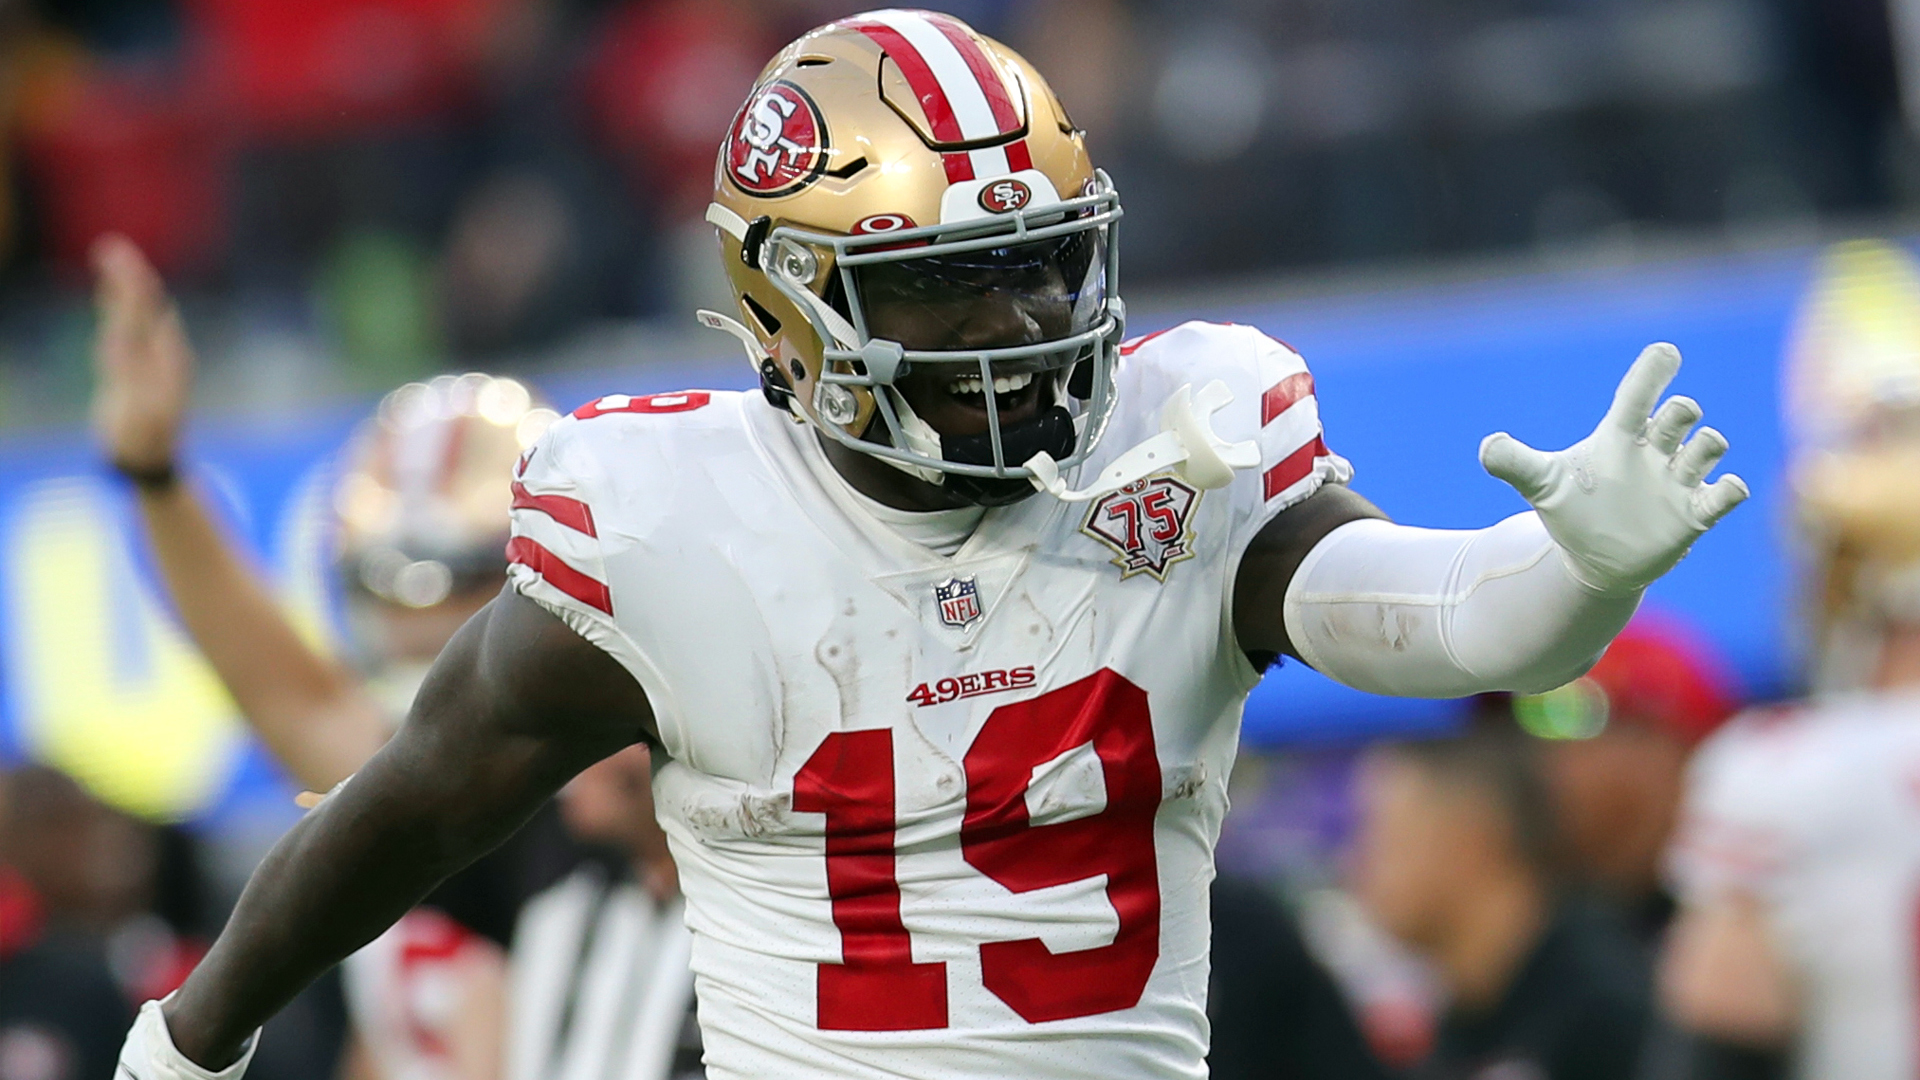 San Francisco 49ers WR Deebo Samuel signs three-year, $73.5 million  contract extension, NFL News, Rankings and Statistics